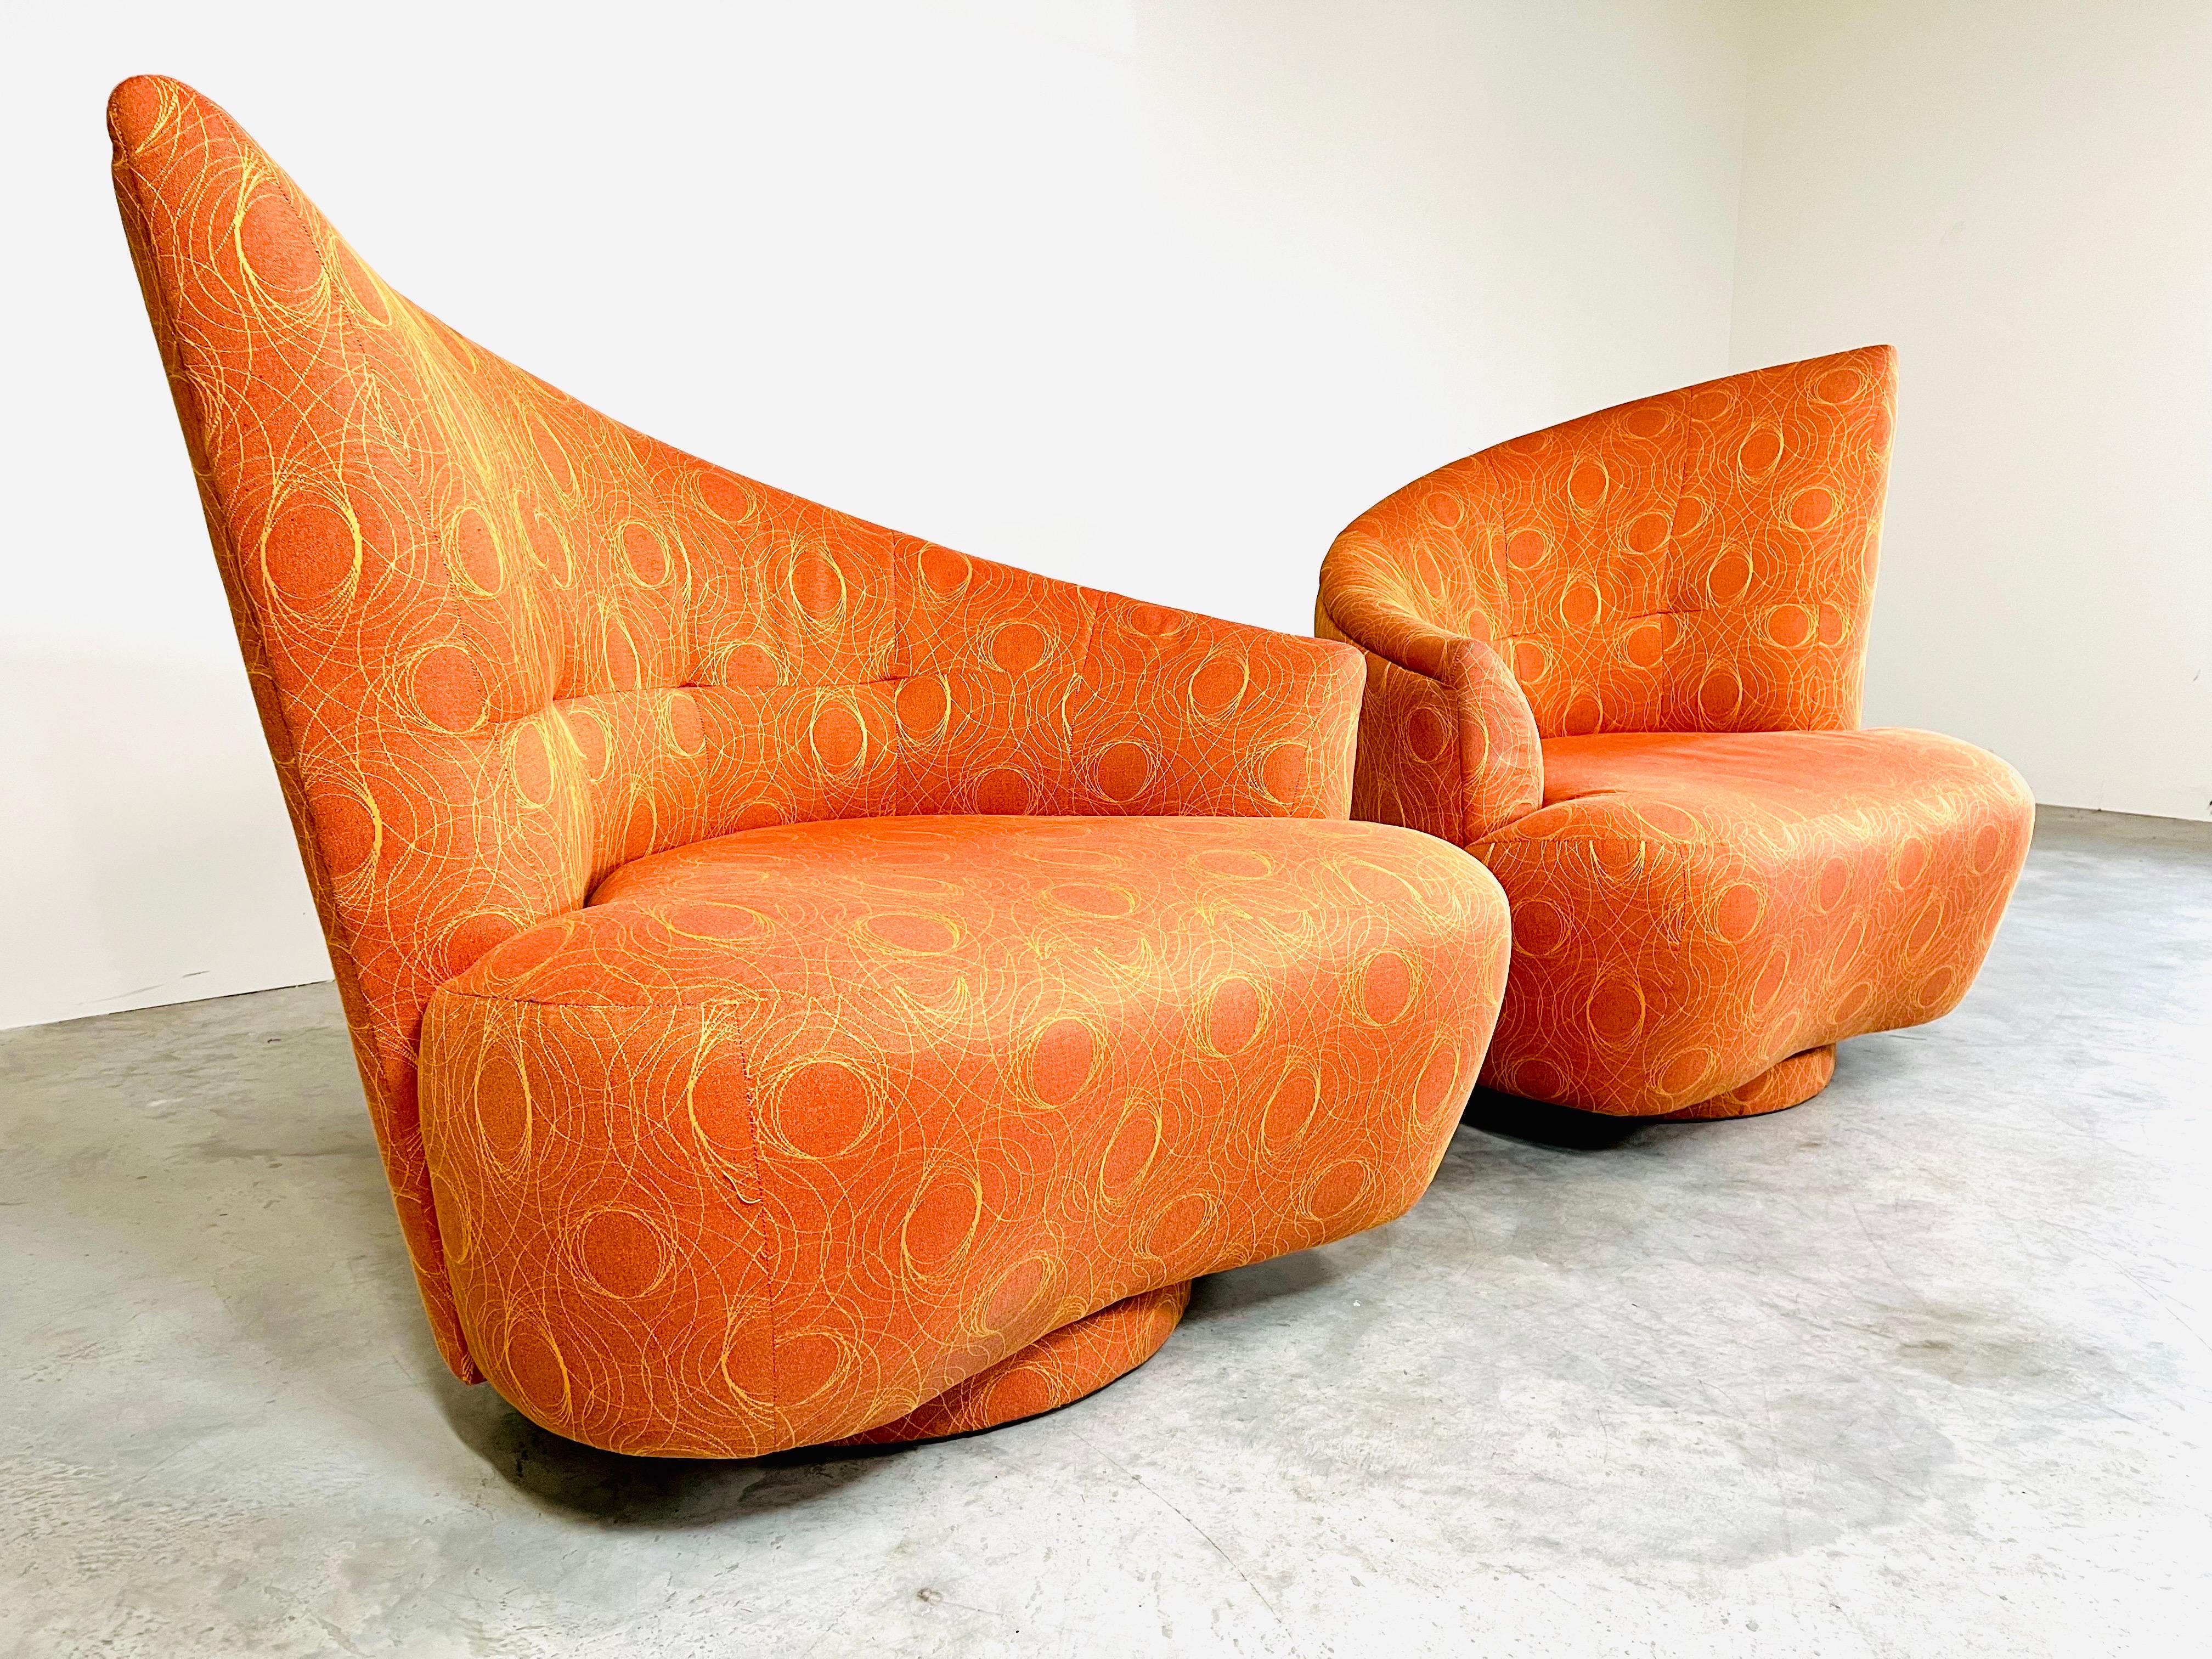 A pair of “Bilbao” swivel lounge or club chairs designed by Vladimir Kagan for Weiman, circa 1980 having original circular patterned fabric that has been well maintained and barely used. A beautiful design that blends comfortable function with